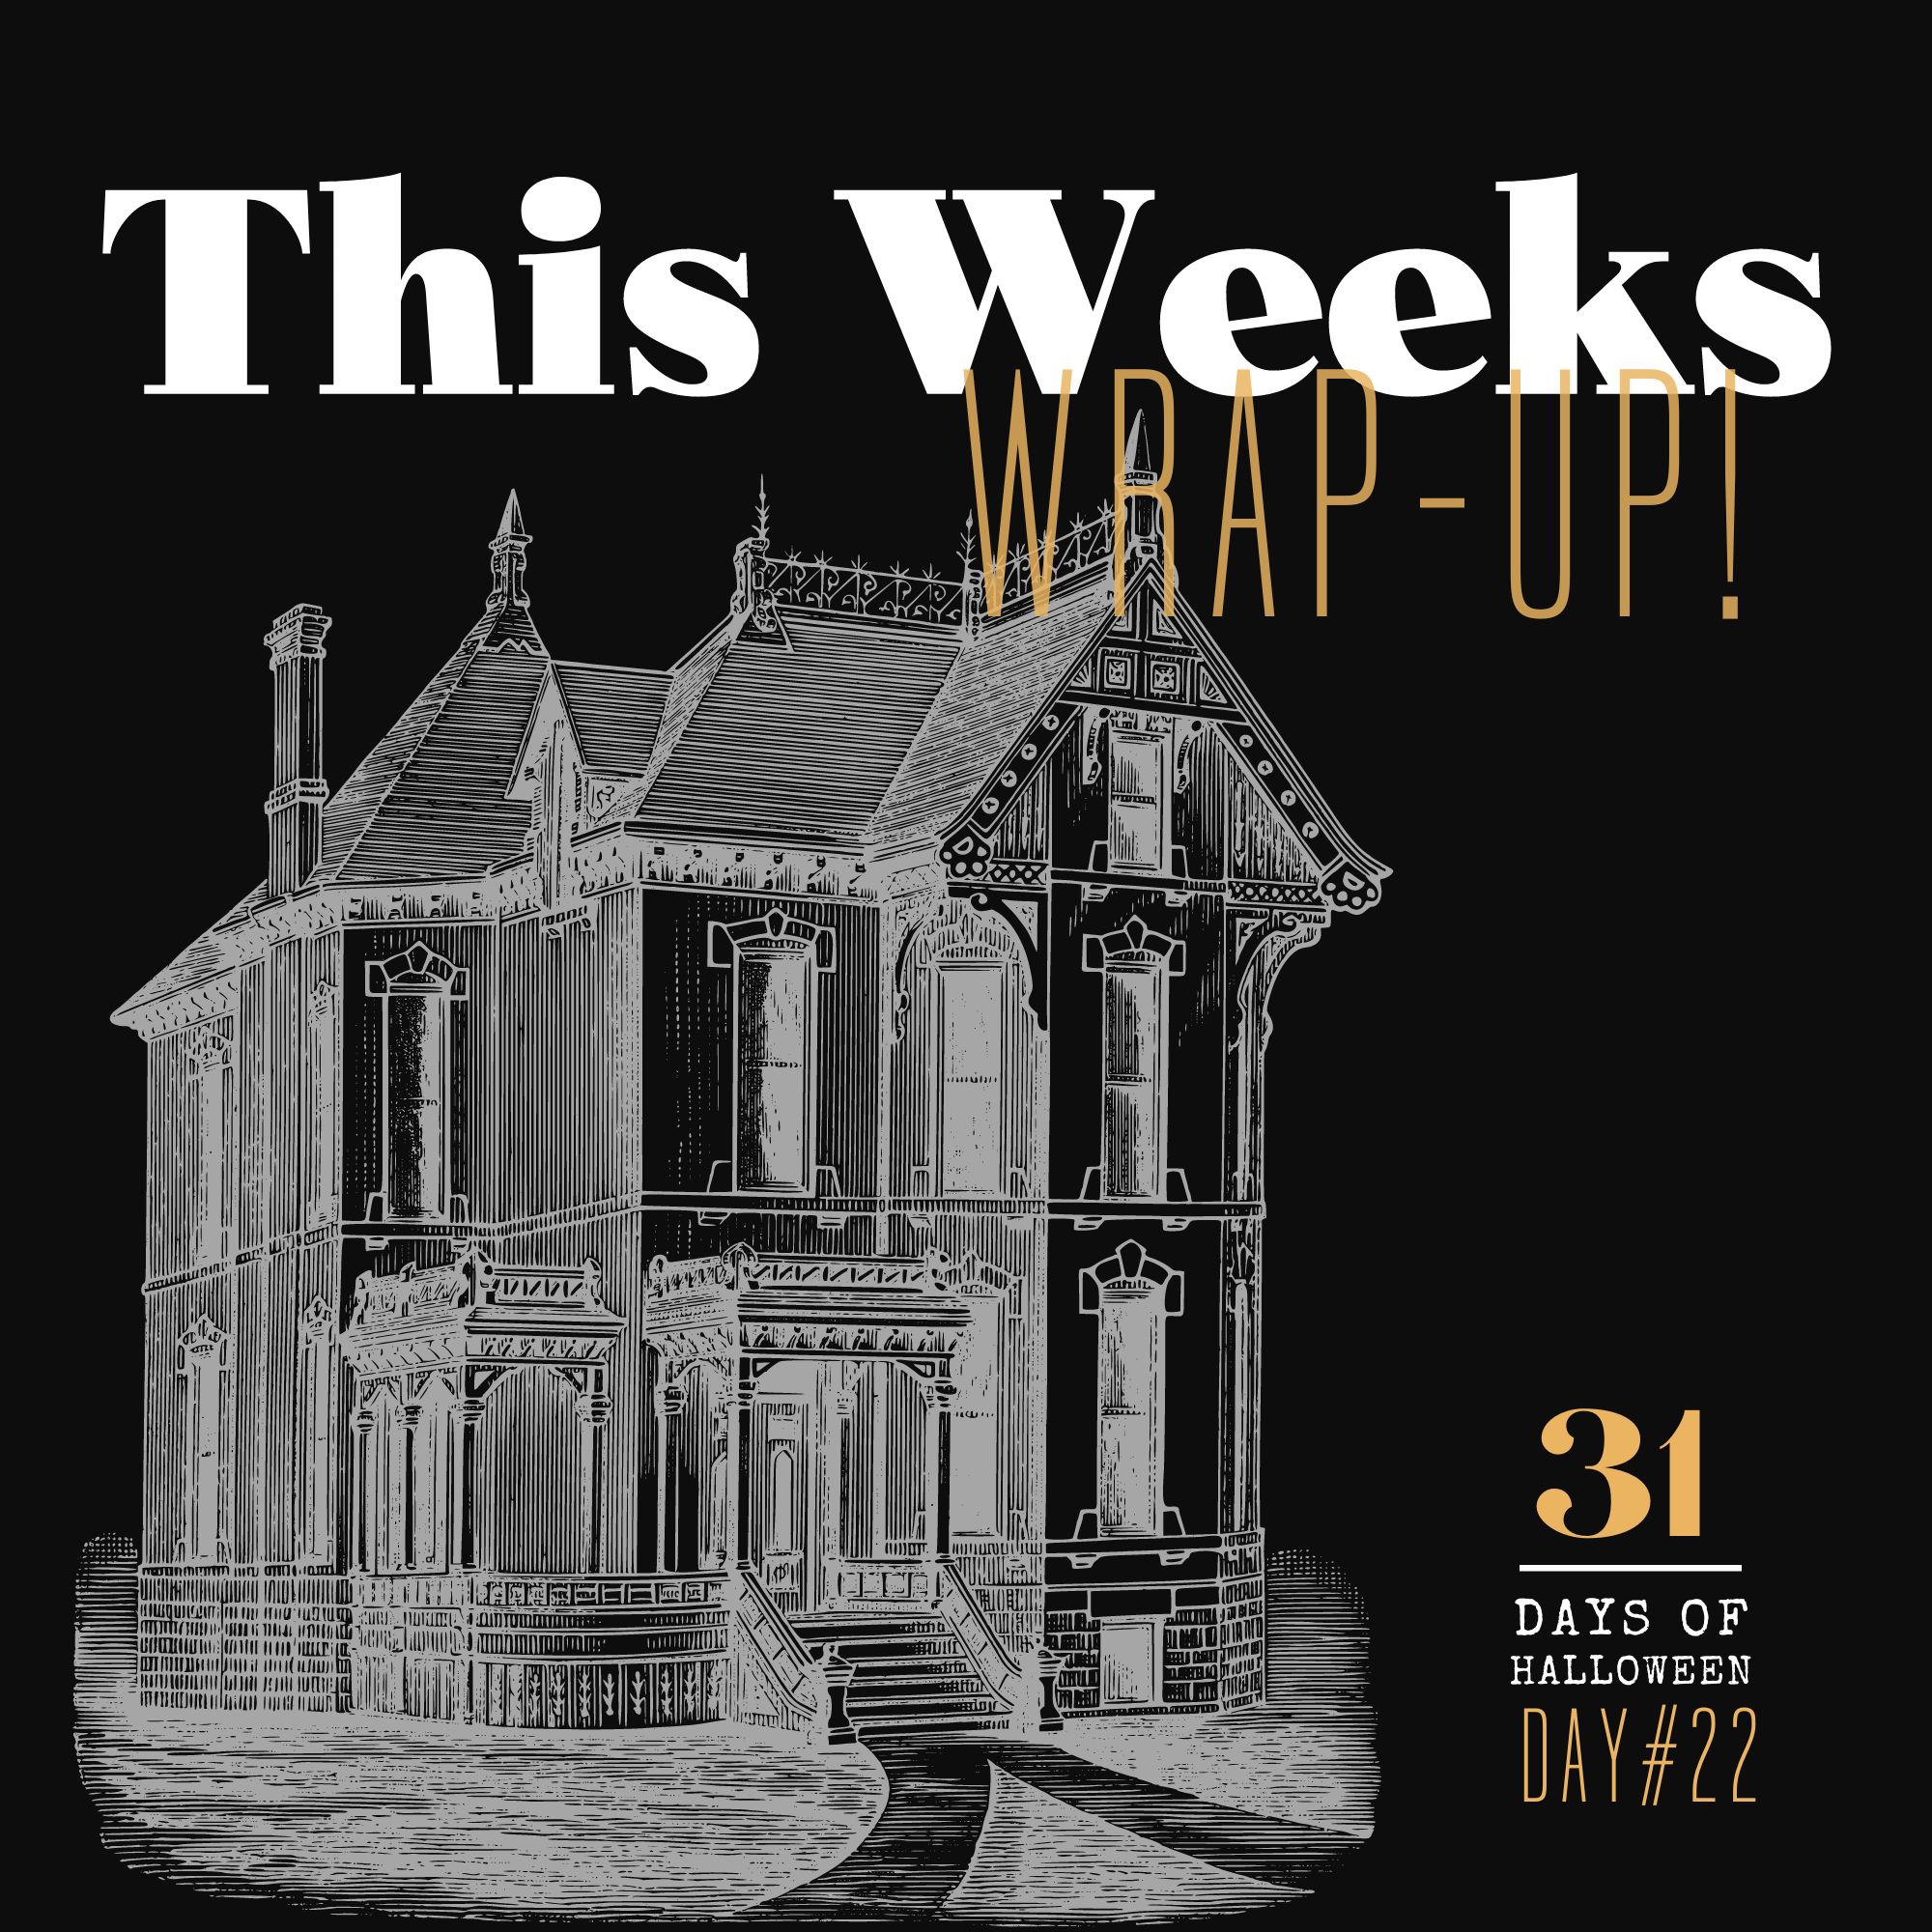 31 Days of Halloween: Day #22 …I’m Wrapping Up the 3rd Week of the Series!